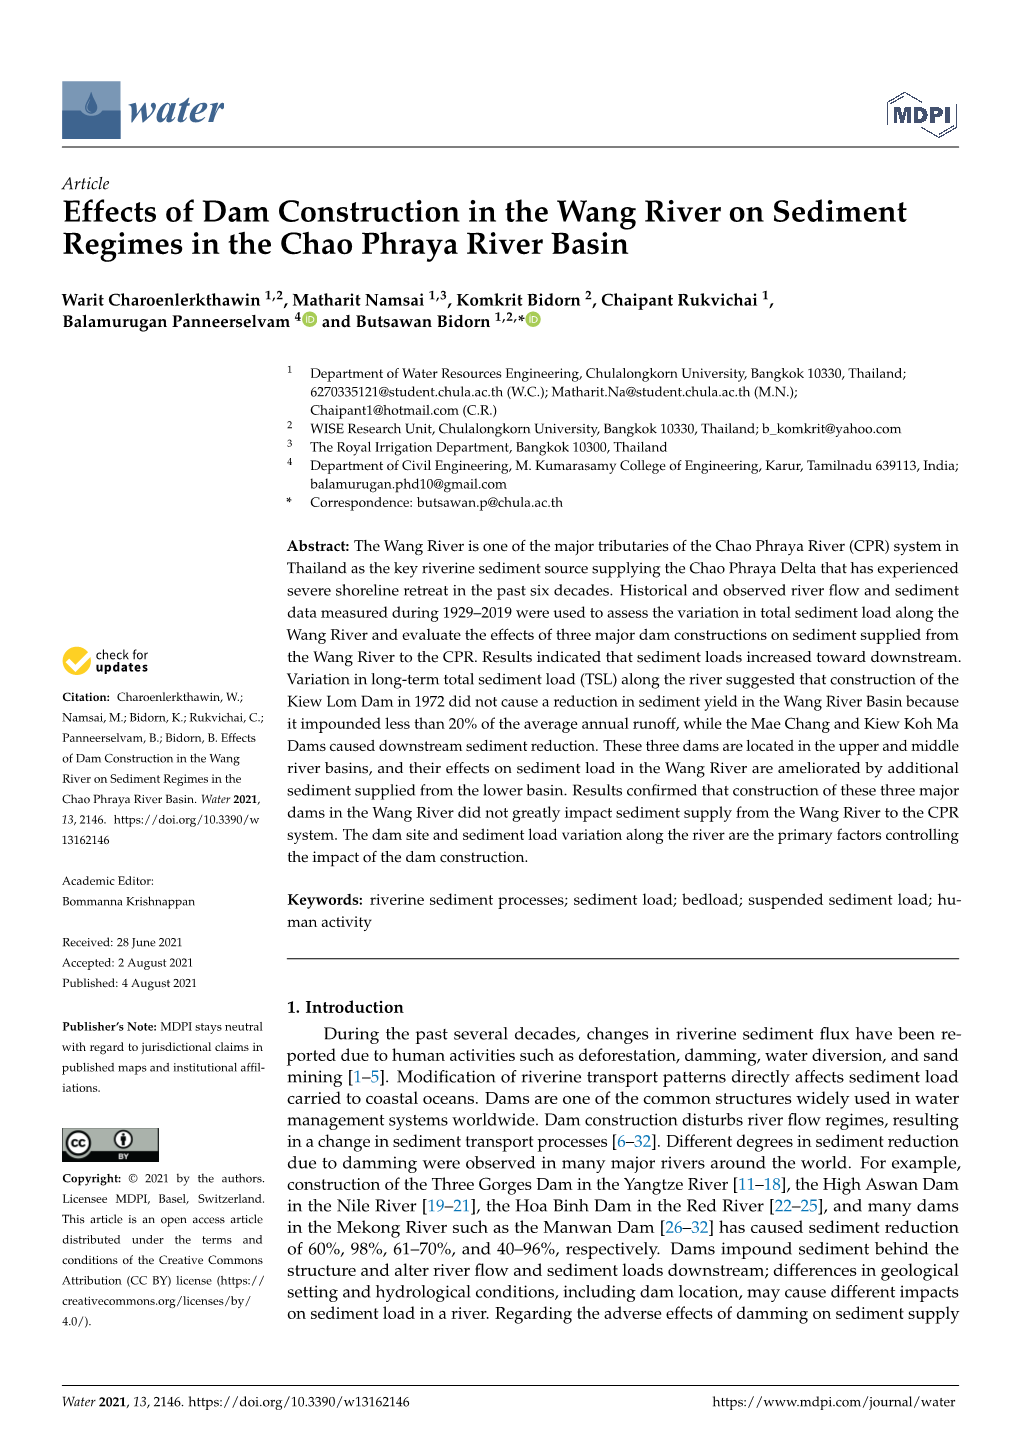 Effects of Dam Construction in the Wang River on Sediment Regimes in the Chao Phraya River Basin